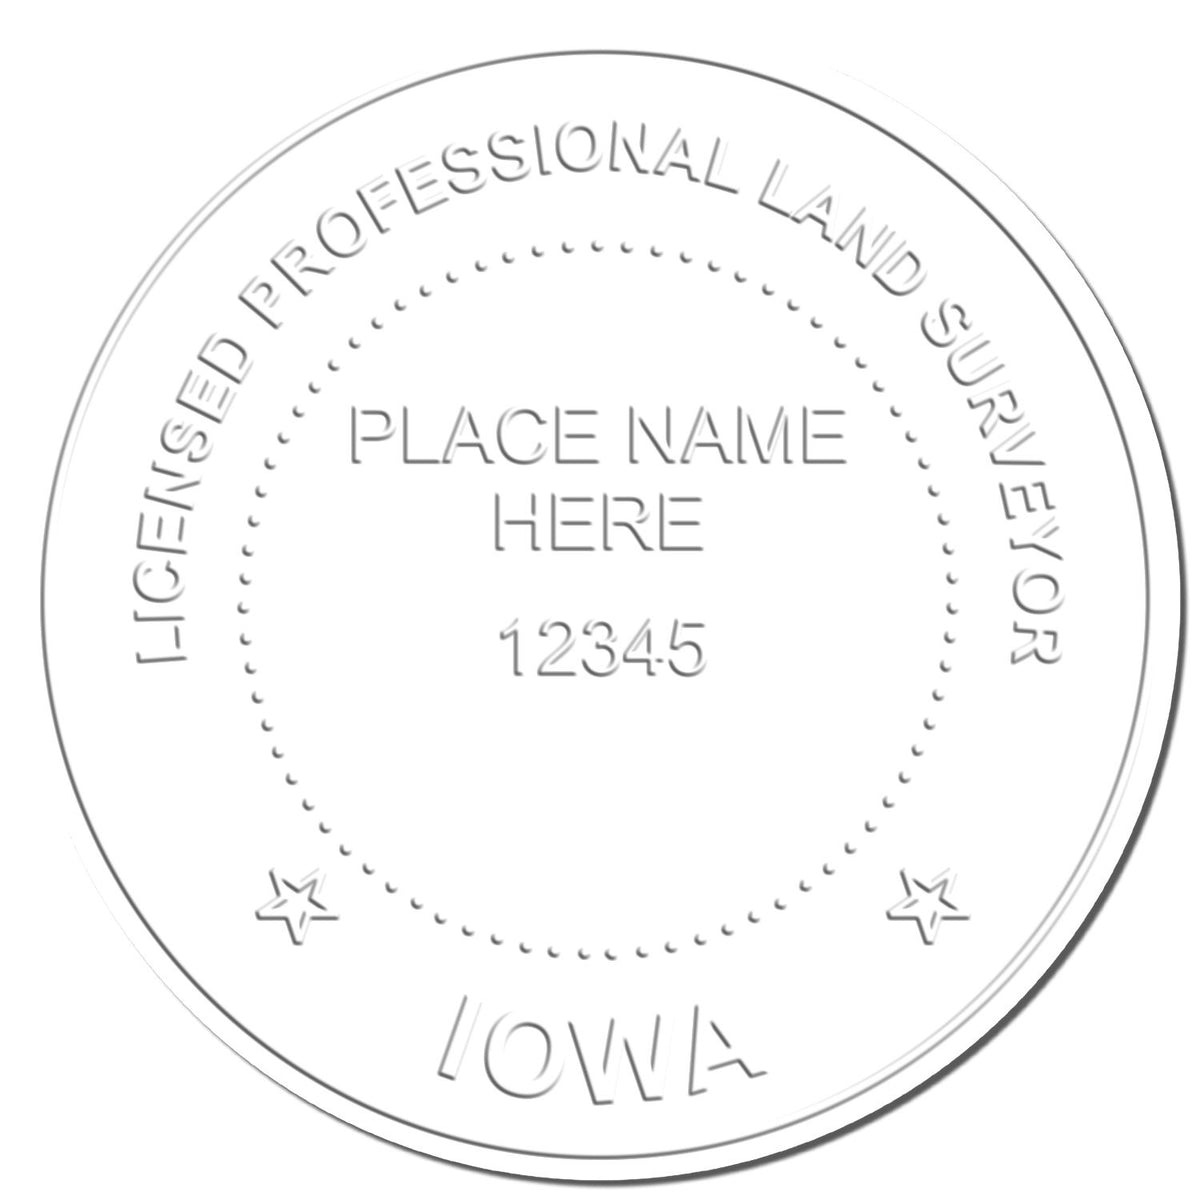 This paper is stamped with a sample imprint of the Hybrid Iowa Land Surveyor Seal, signifying its quality and reliability.